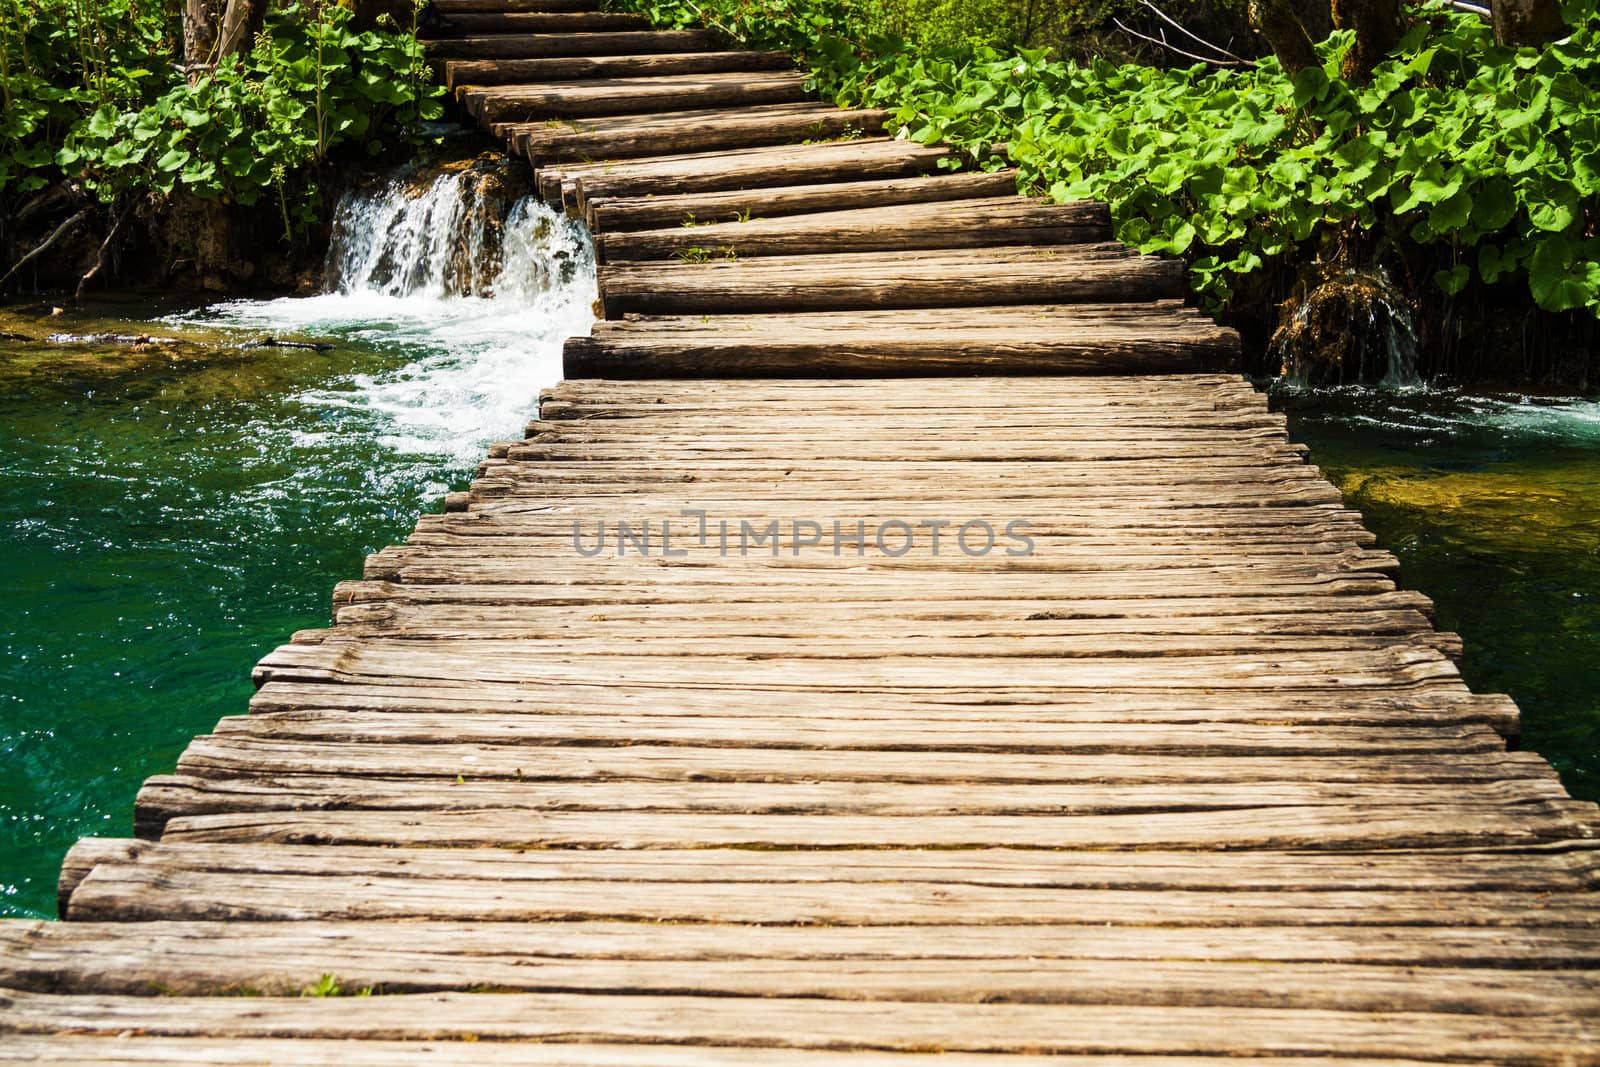 Wooden path in Plitvice Lakes National Park, Croatia by Lamarinx